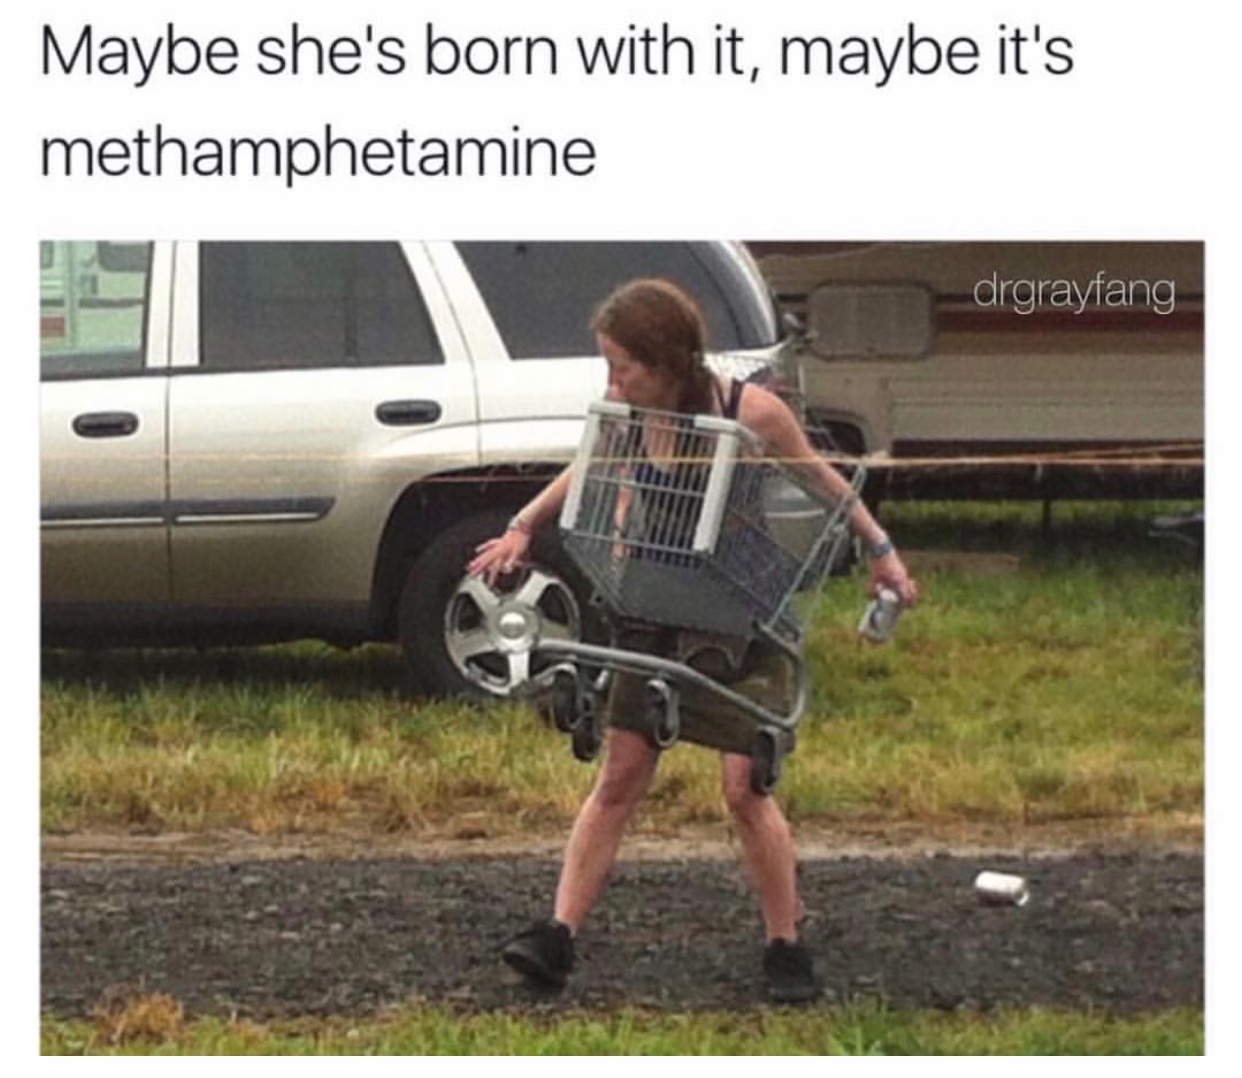 memes - maybe shes born with it maybe its methamphetamine - Maybe she's born with it, maybe it's methamphetamine drgrayfang